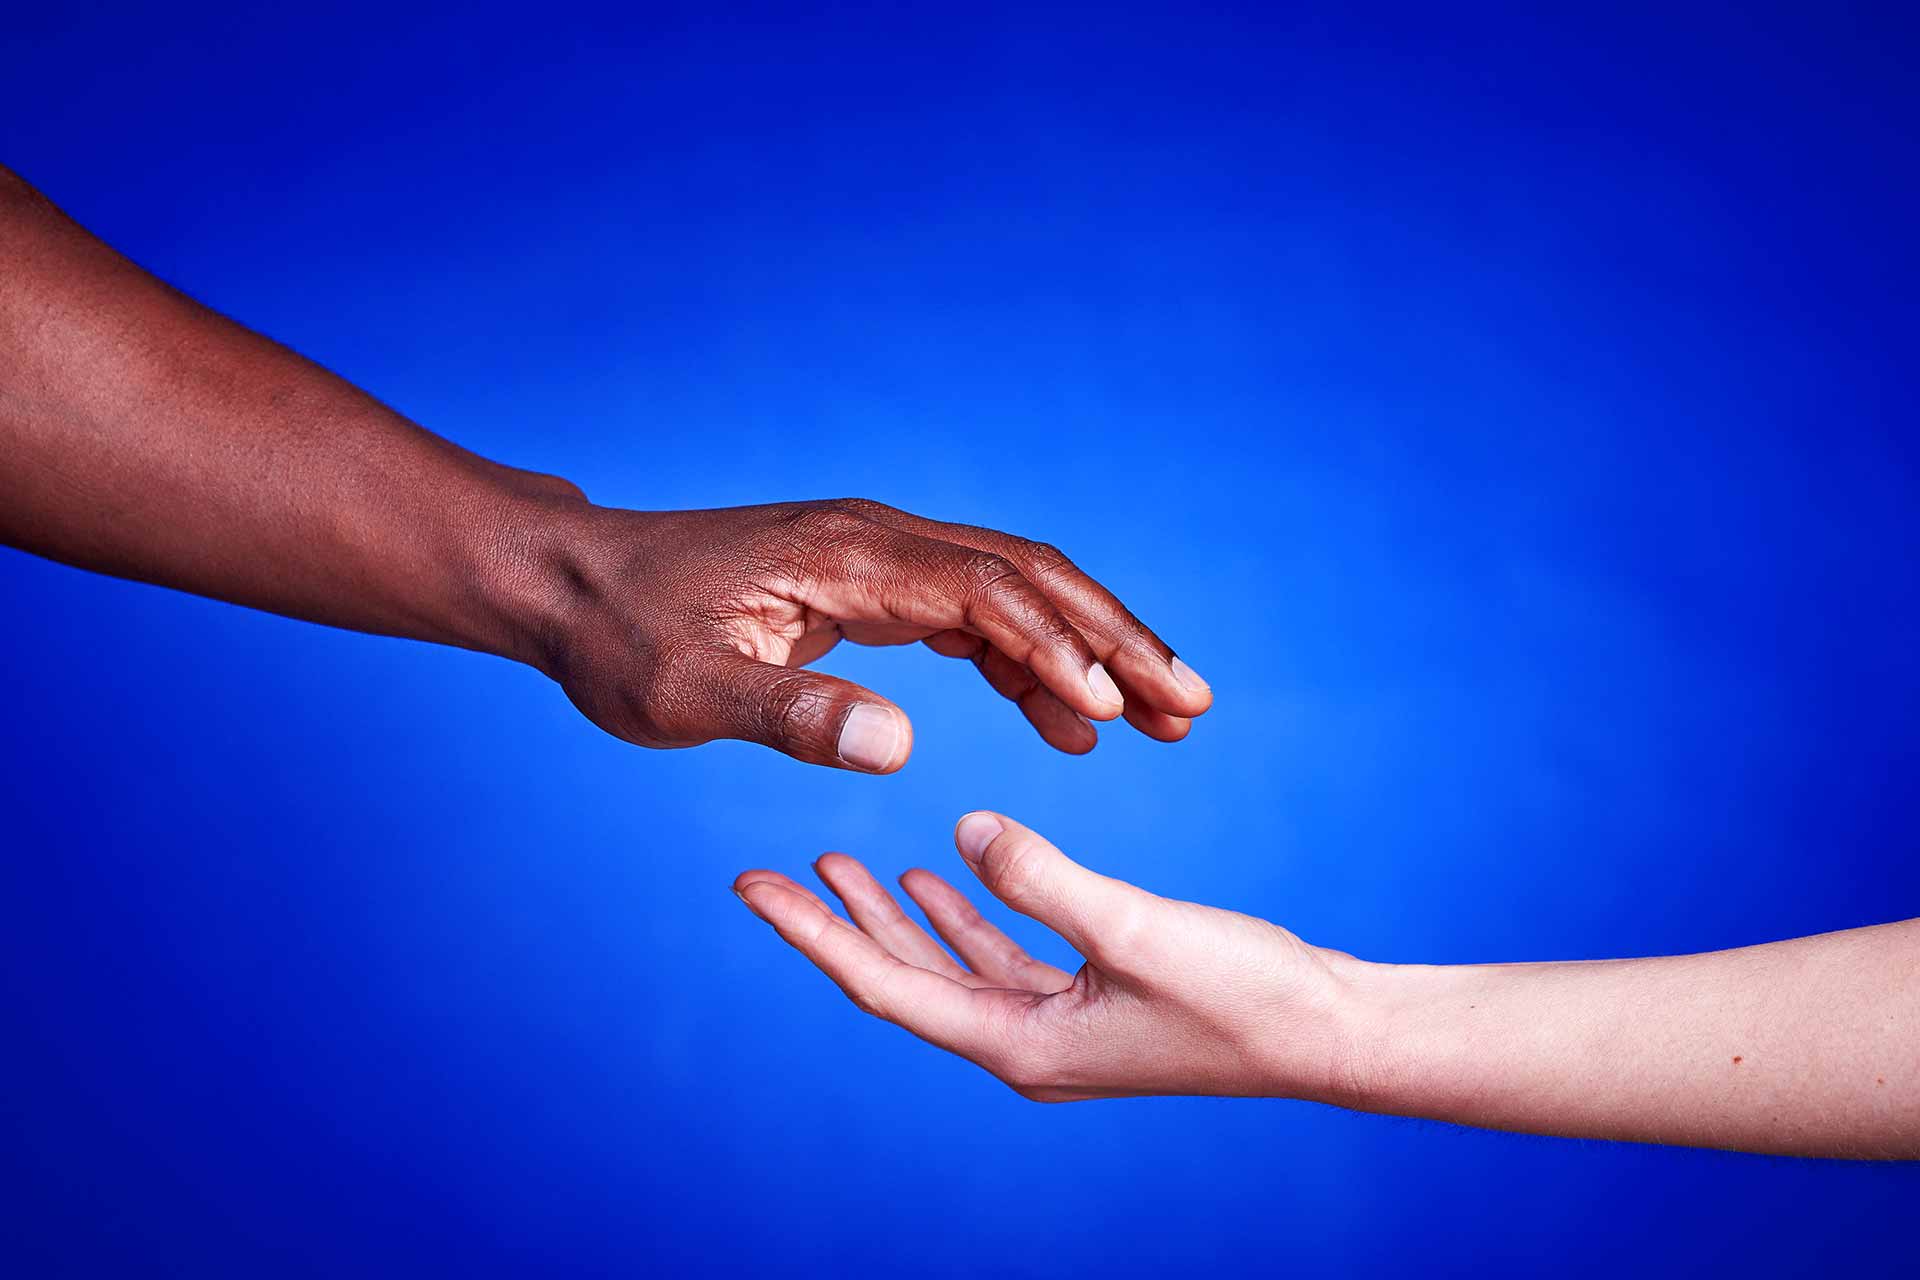 Black and white hands together against racism